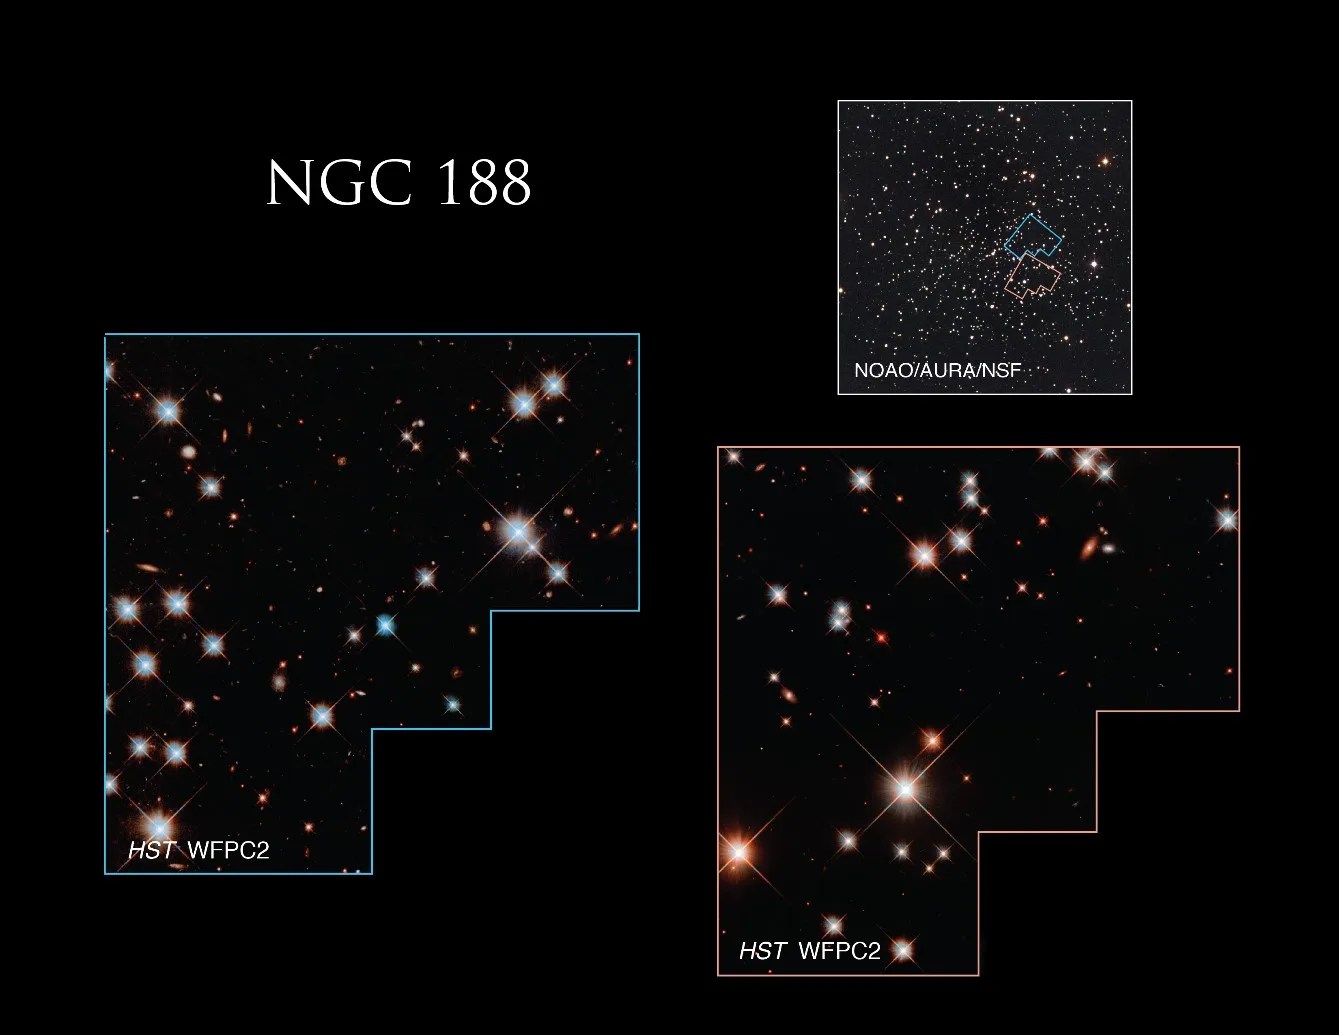 Three images of Caldwell 1. Upper-left is a wide-field image that shows the locations of the other two Hubble images. Bottom-left and bottom-right are Hubble images of a scattering of stars against a black backdrop. Stars in left image are bluish. Stars in right image are reddish. 